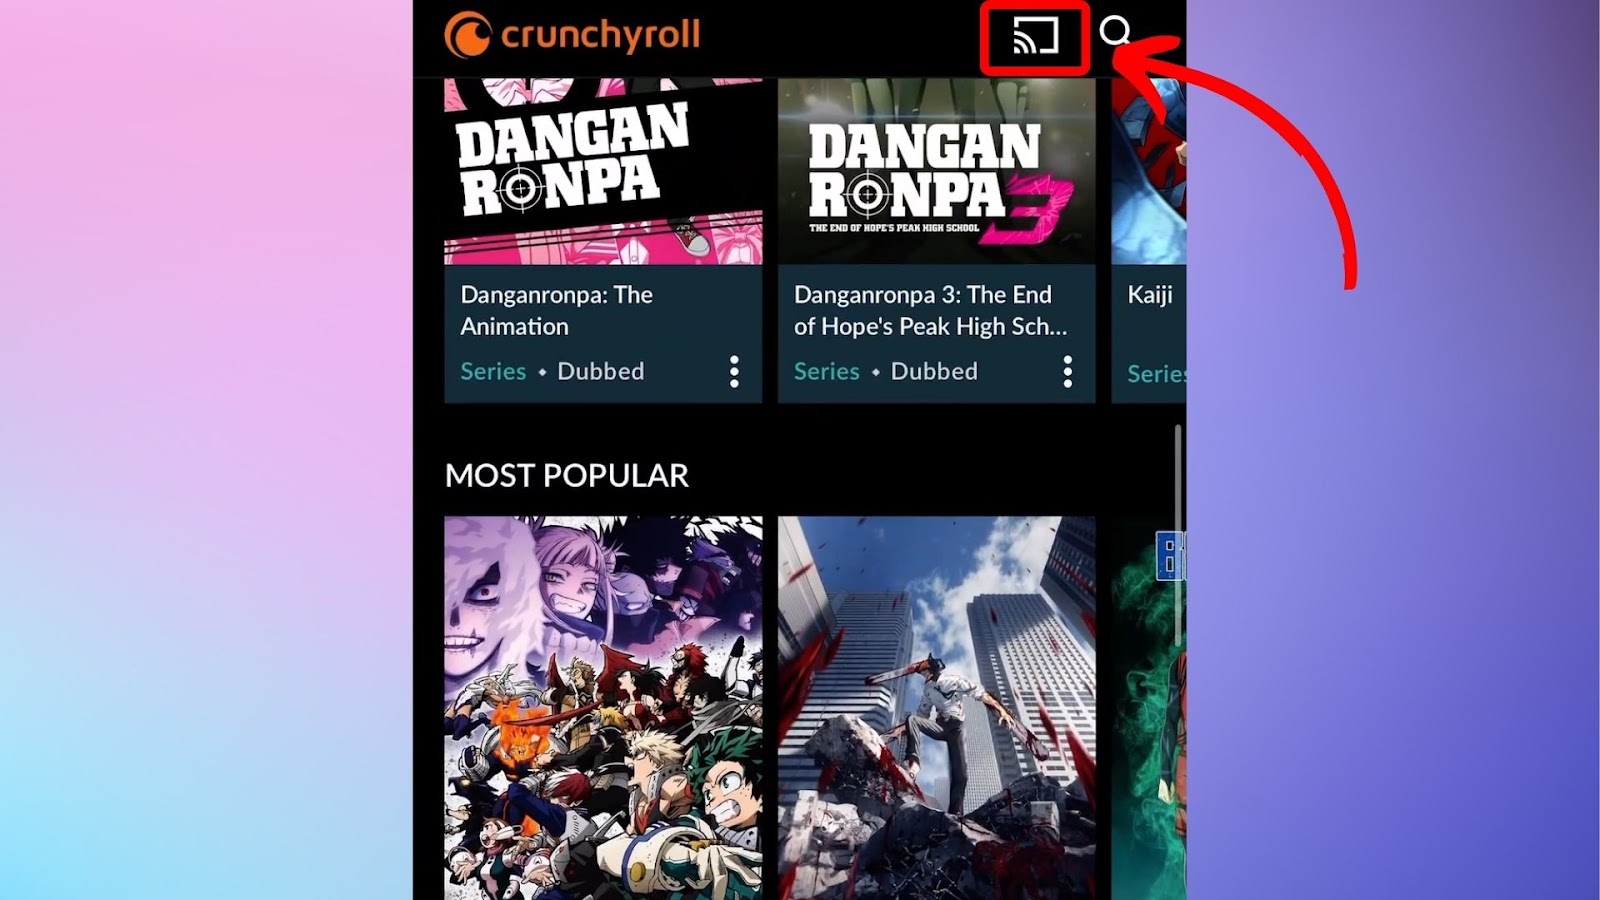 How to Cast Crunchyroll on Samsung TV from an iPhone